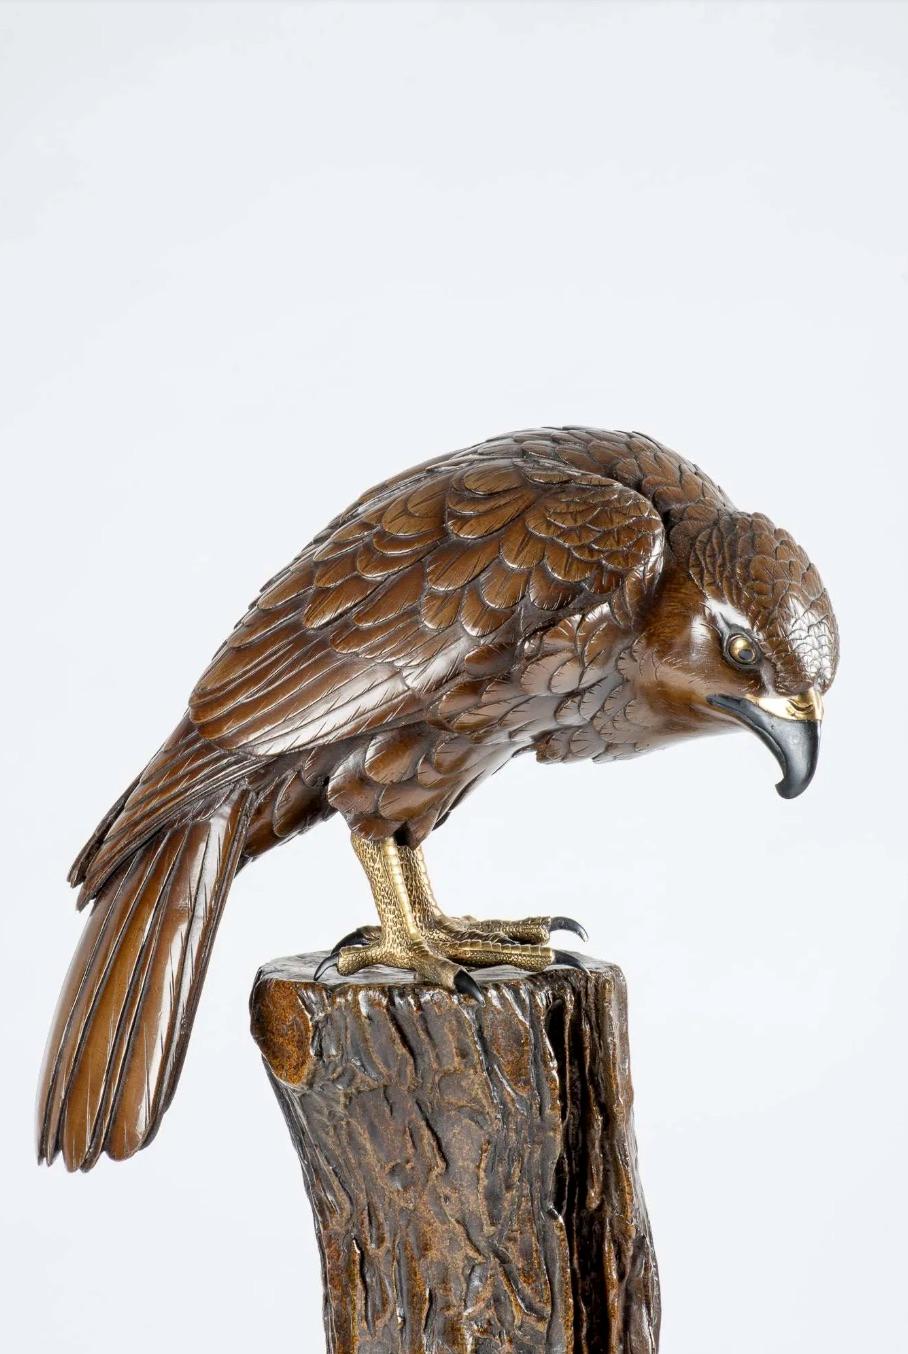 A Japanese bronze sculpture depicting a perched falcon in light patina with polychrome eyes, beak and legs in black contrasting with pure gold.

The sculpture depicts the falcon in a moment of serene repose, perched with an aura of regal